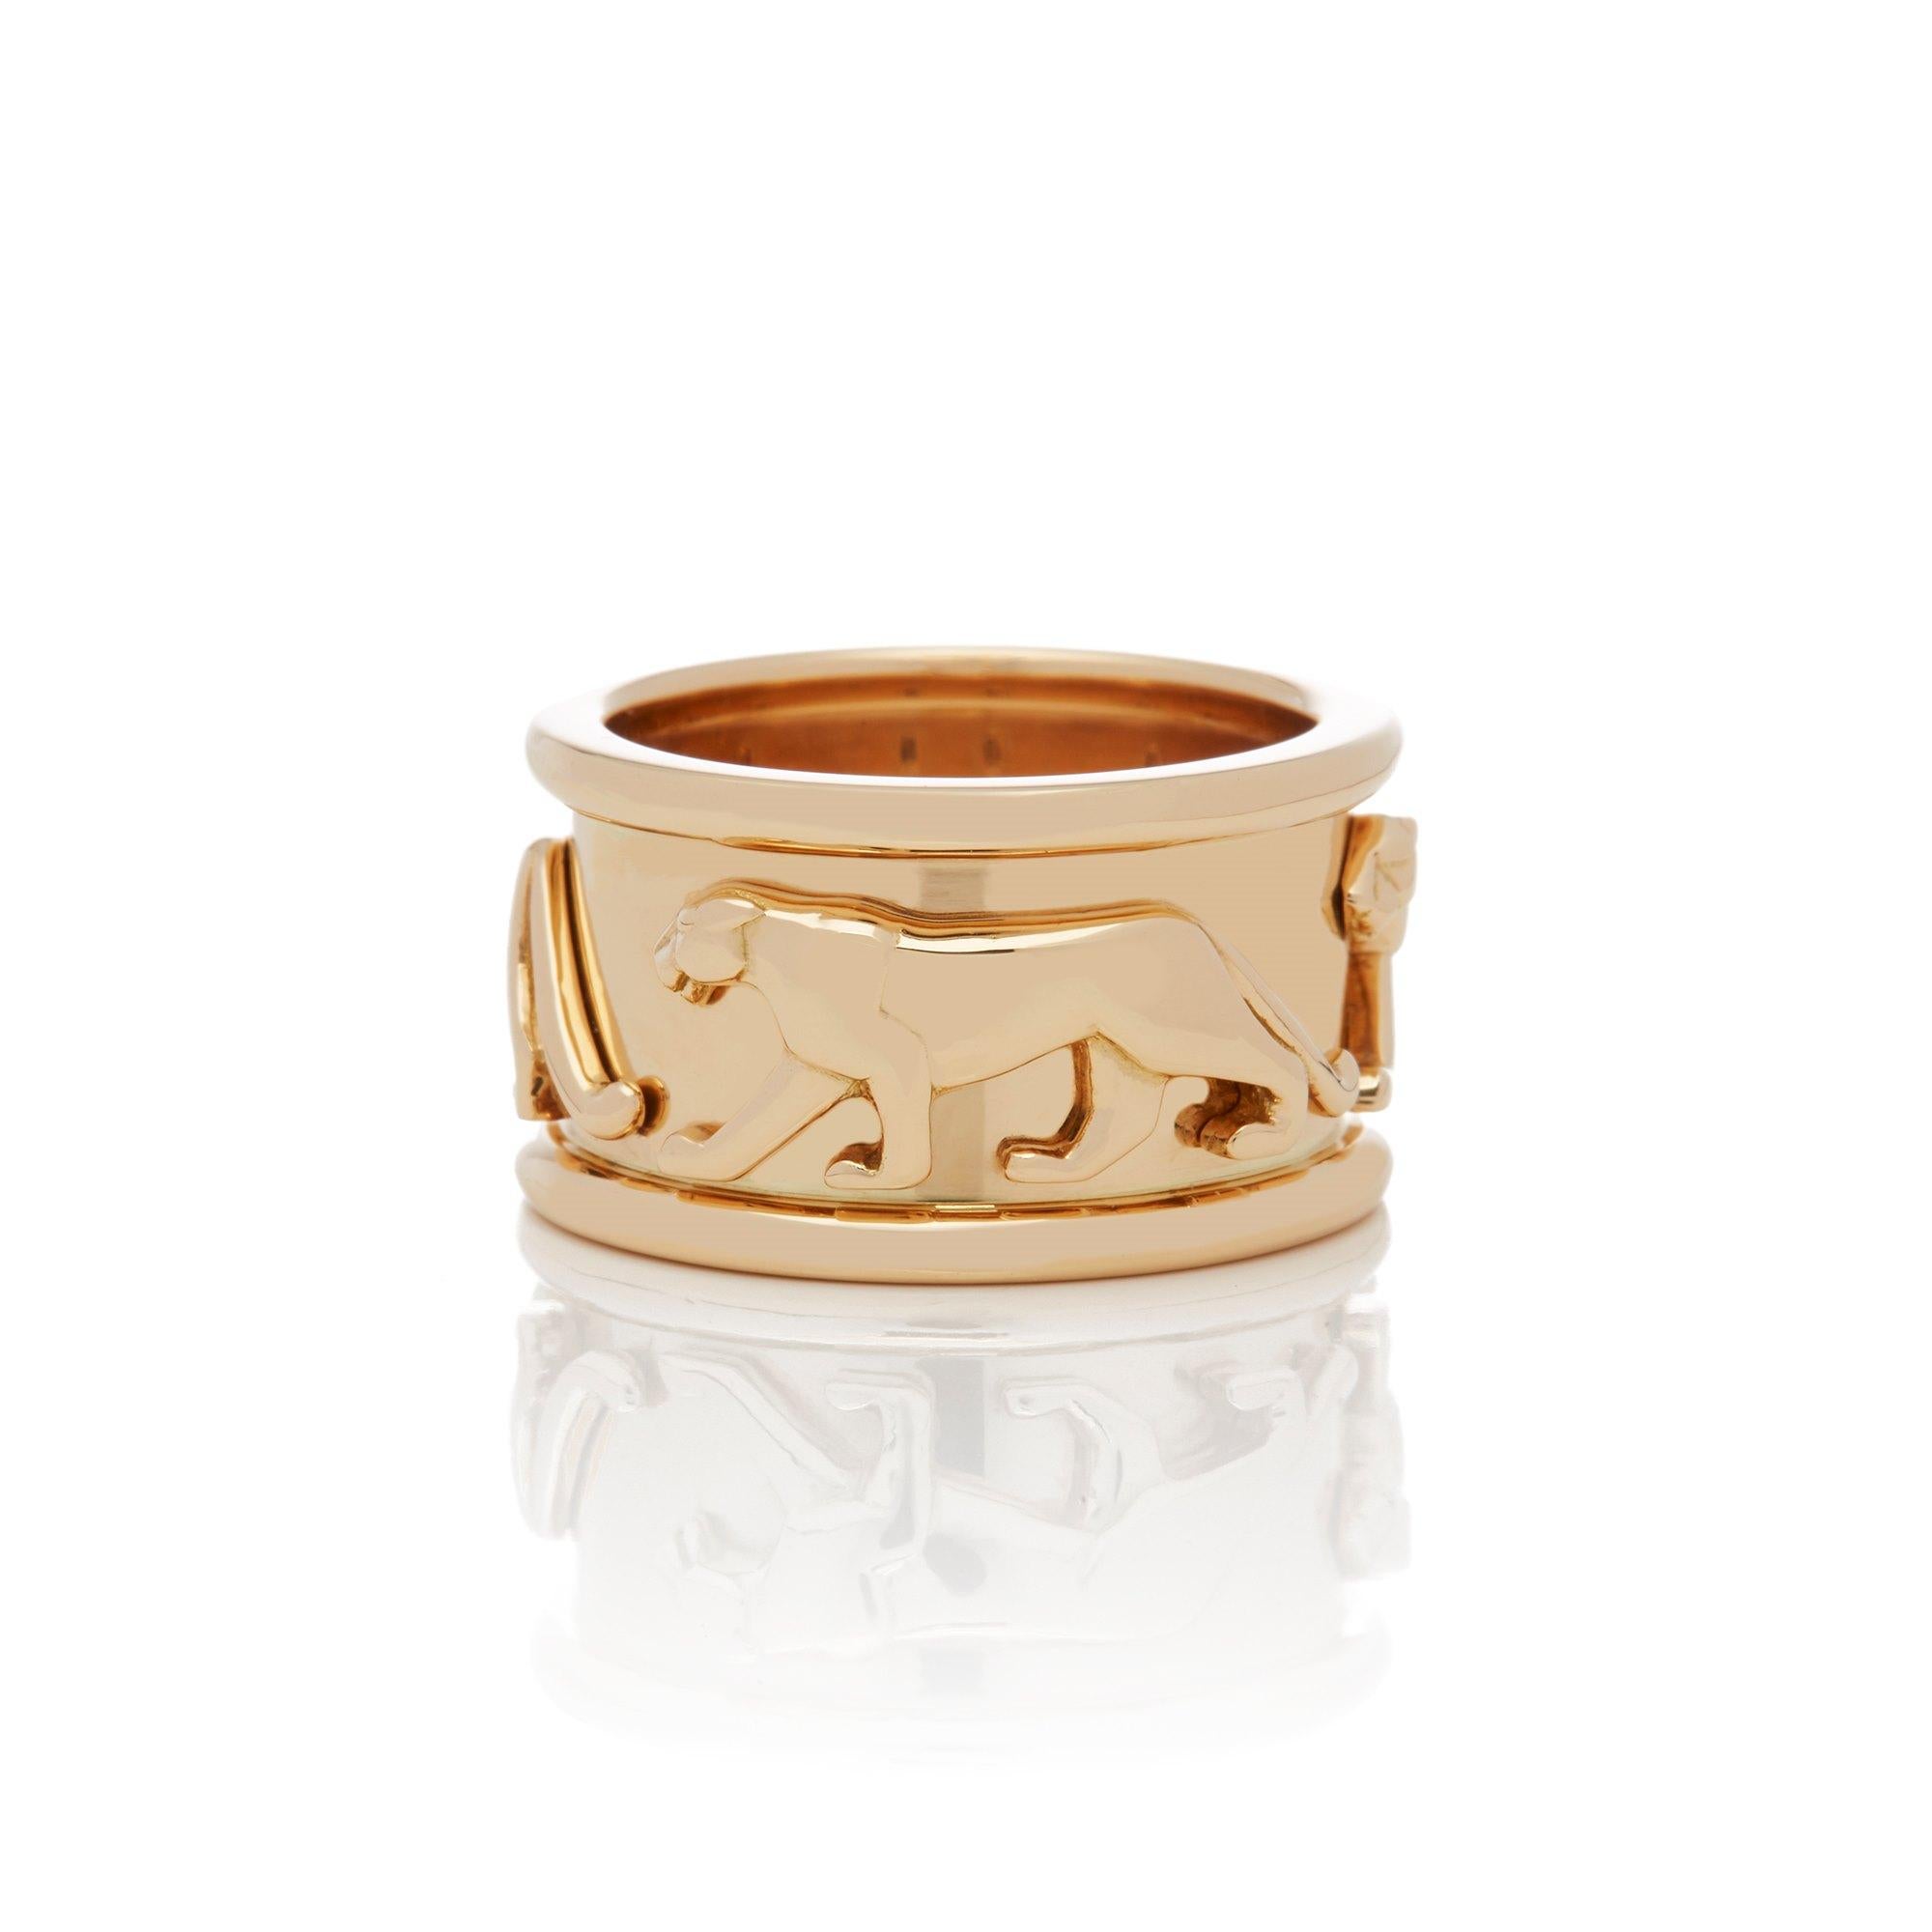 This Ring by Cartier is from their Panthere Collection and features three Signature Panthere's mounted on an 18k Yellow Gold band. UK Size M, EU Size 53, US Size 6 1/2. Complete with Xupes Presentation Box. Our Xupes reference is COMJ186 should you